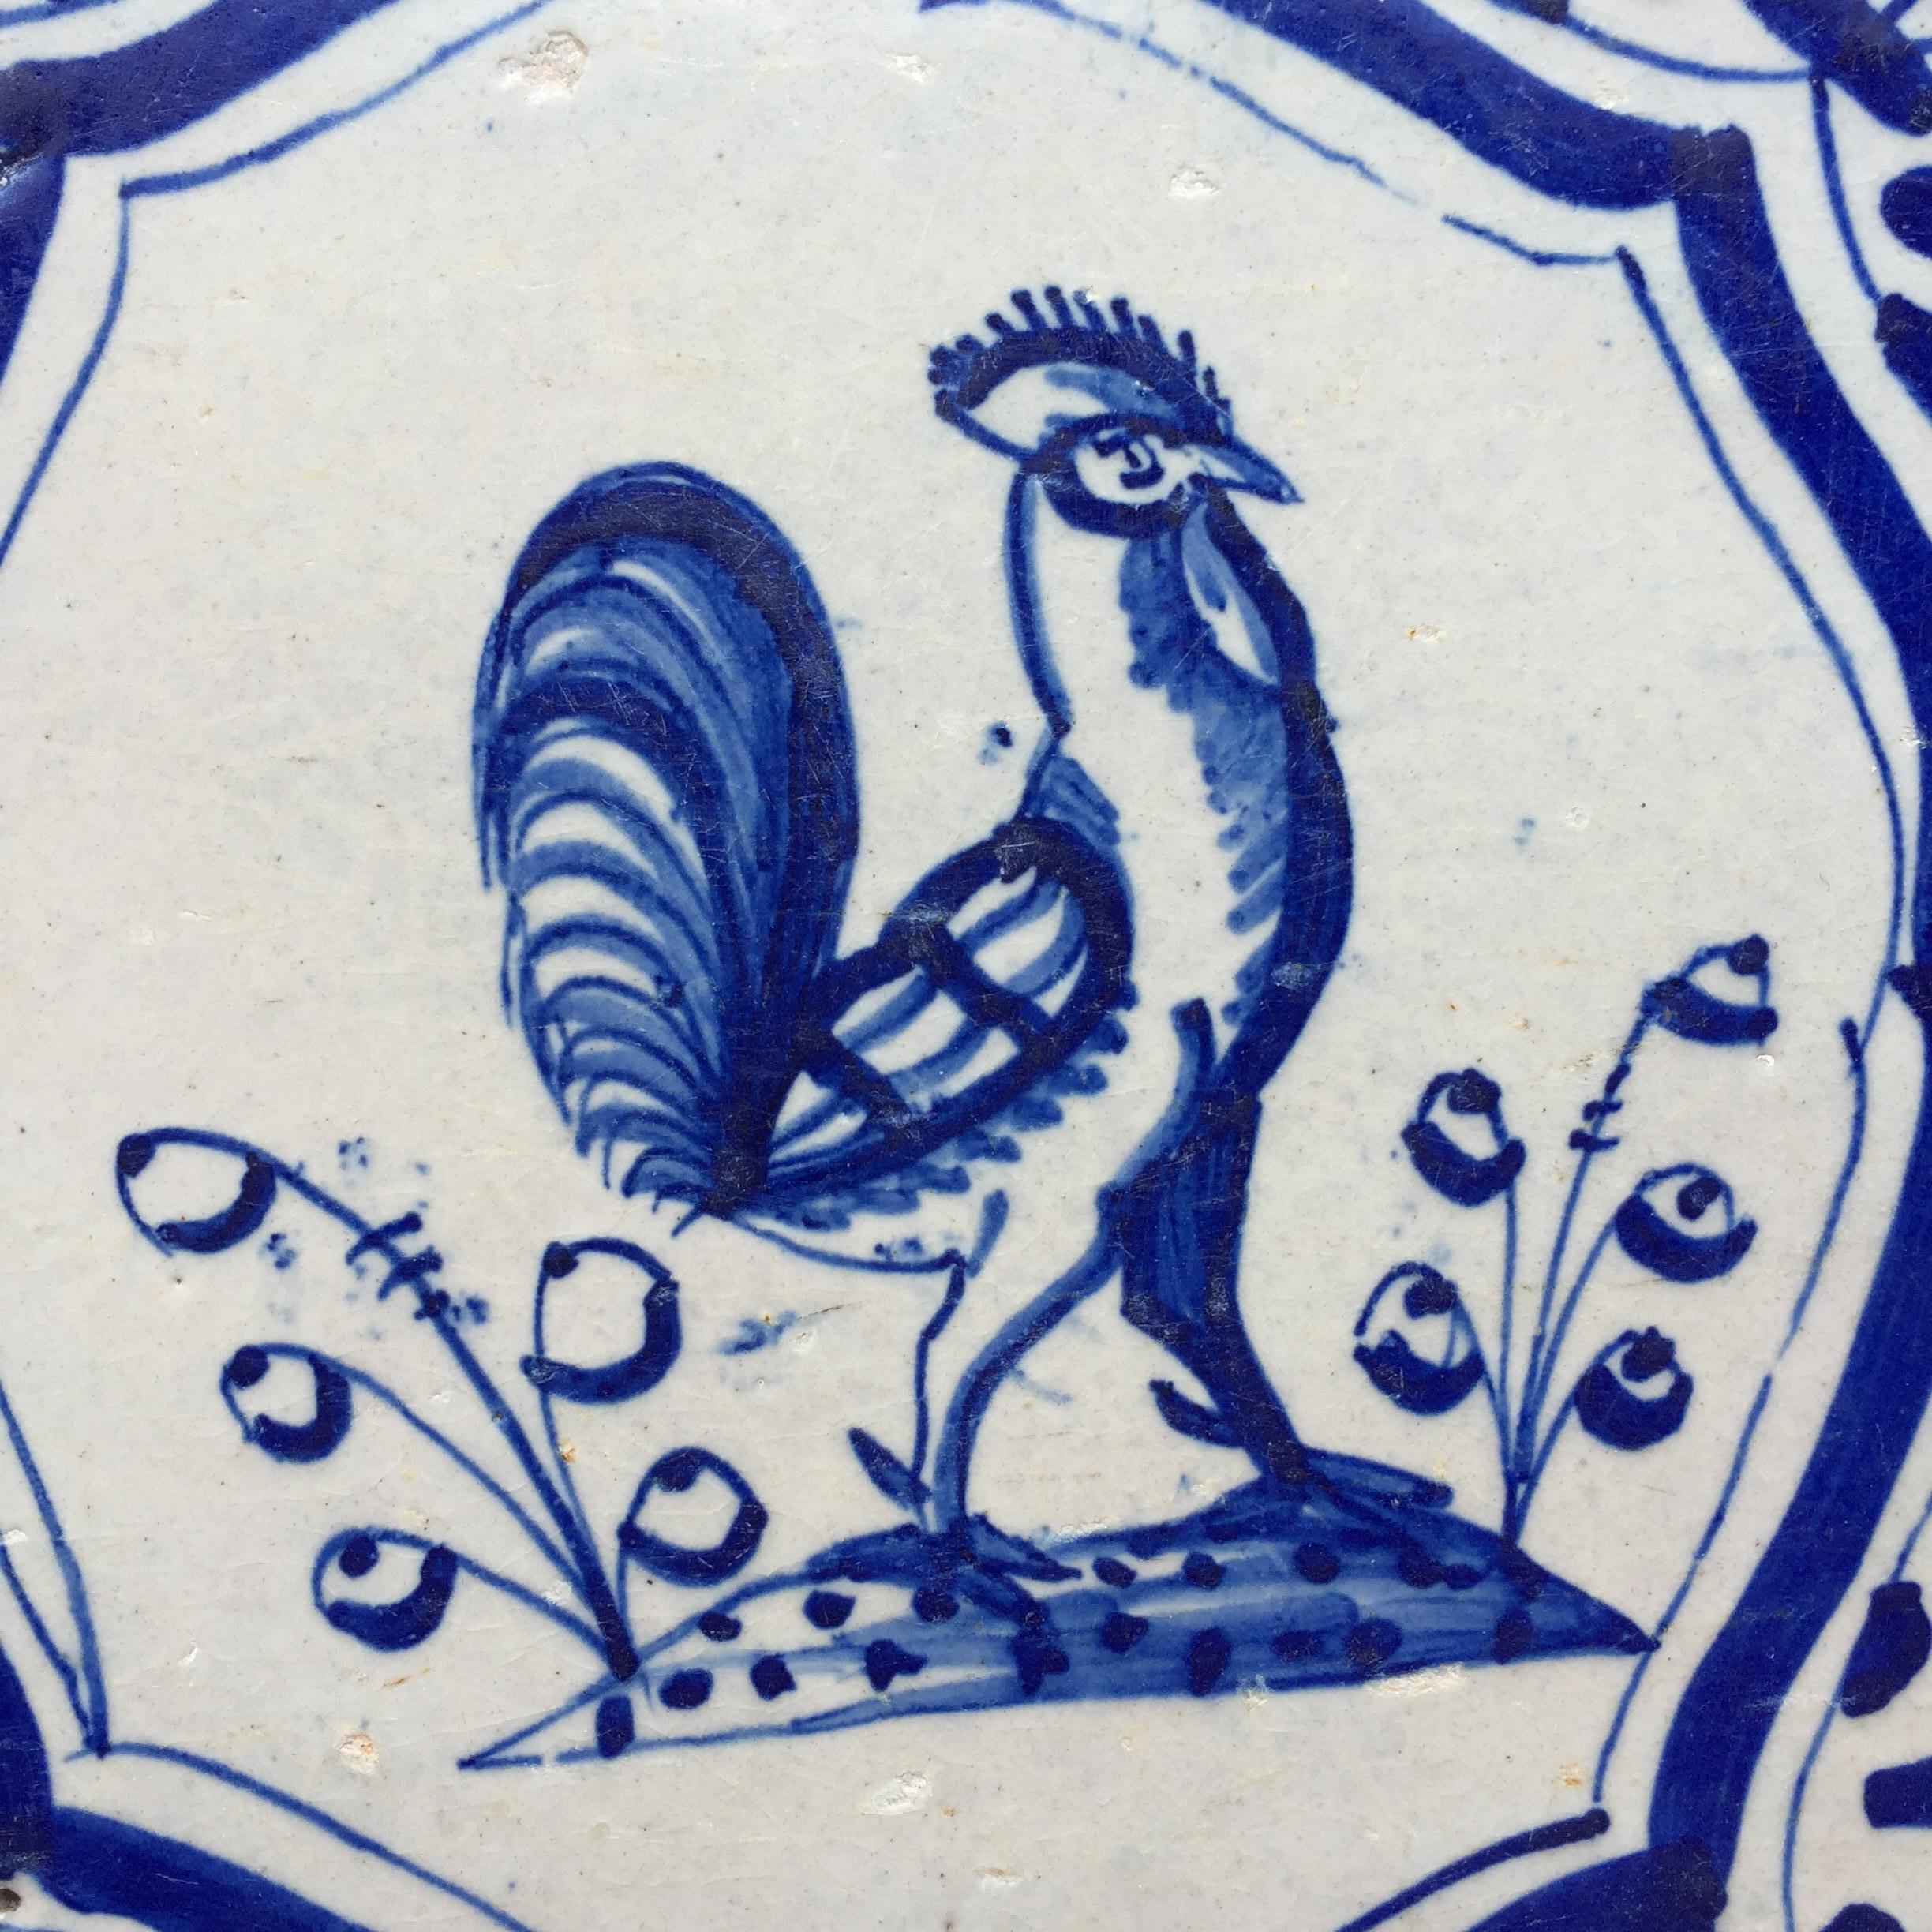 Baroque Two Rare Dutch Delft Tile with Rooster and Chicken, 17th Century